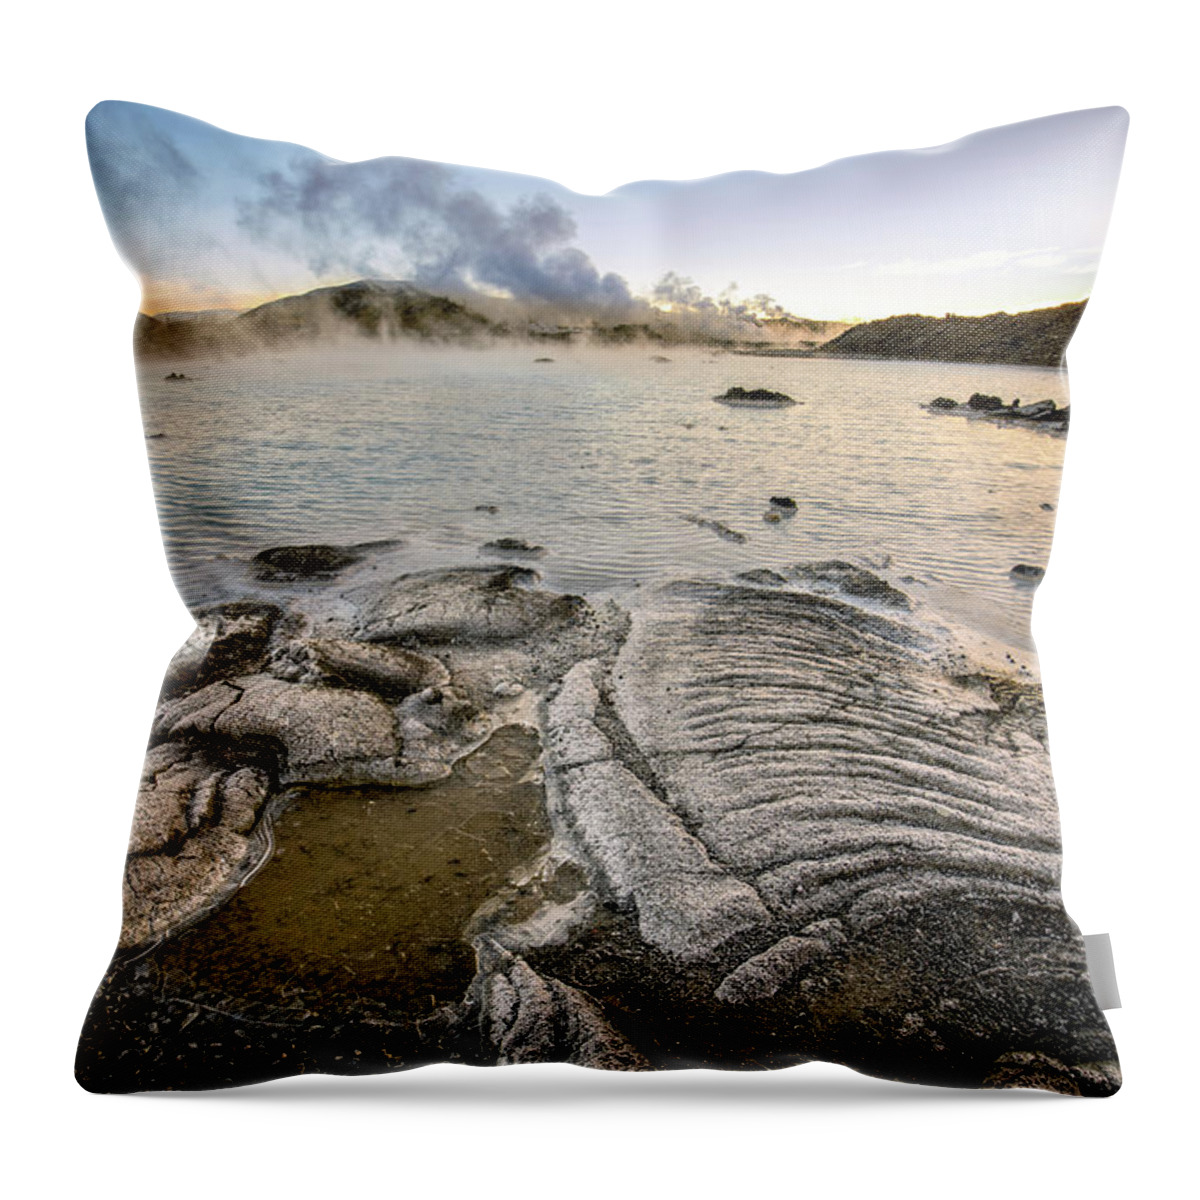 Blue Throw Pillow featuring the photograph Blue Lagoon 1 by Nigel R Bell